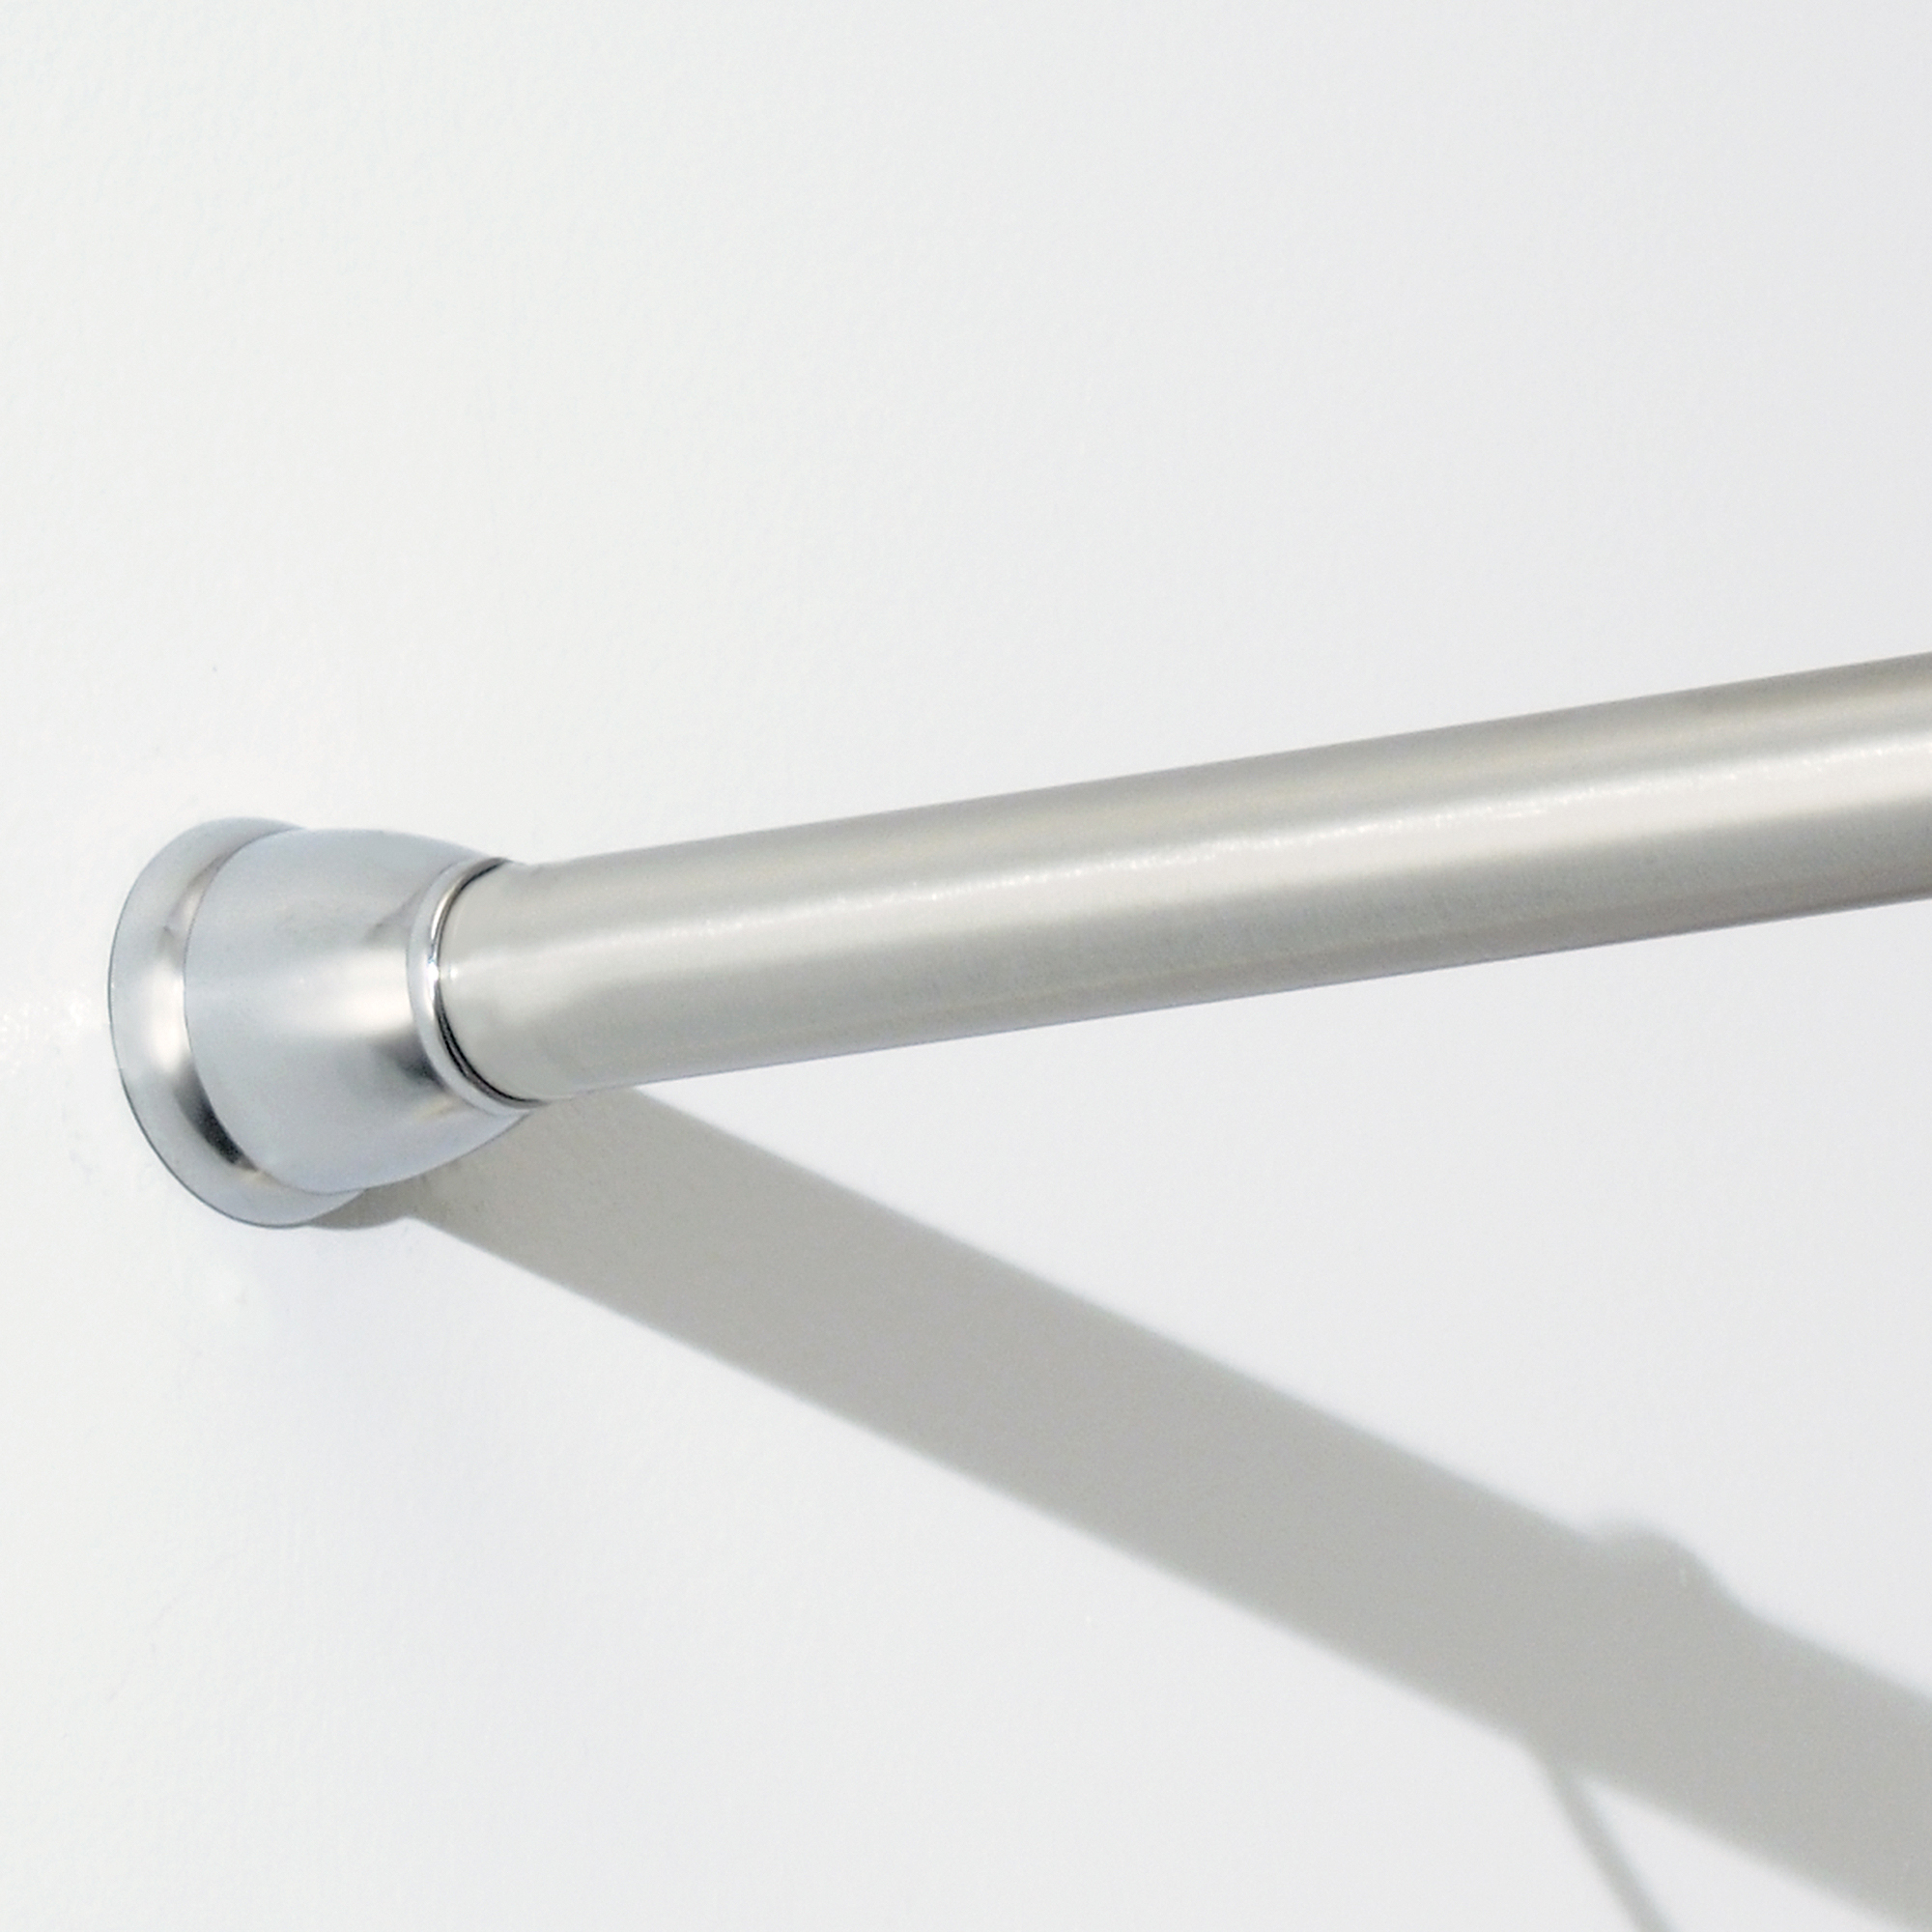 InterDesign Forma Ultra Shower Curtain Tension Rod, Brushed Stainless Steel - image 3 of 4